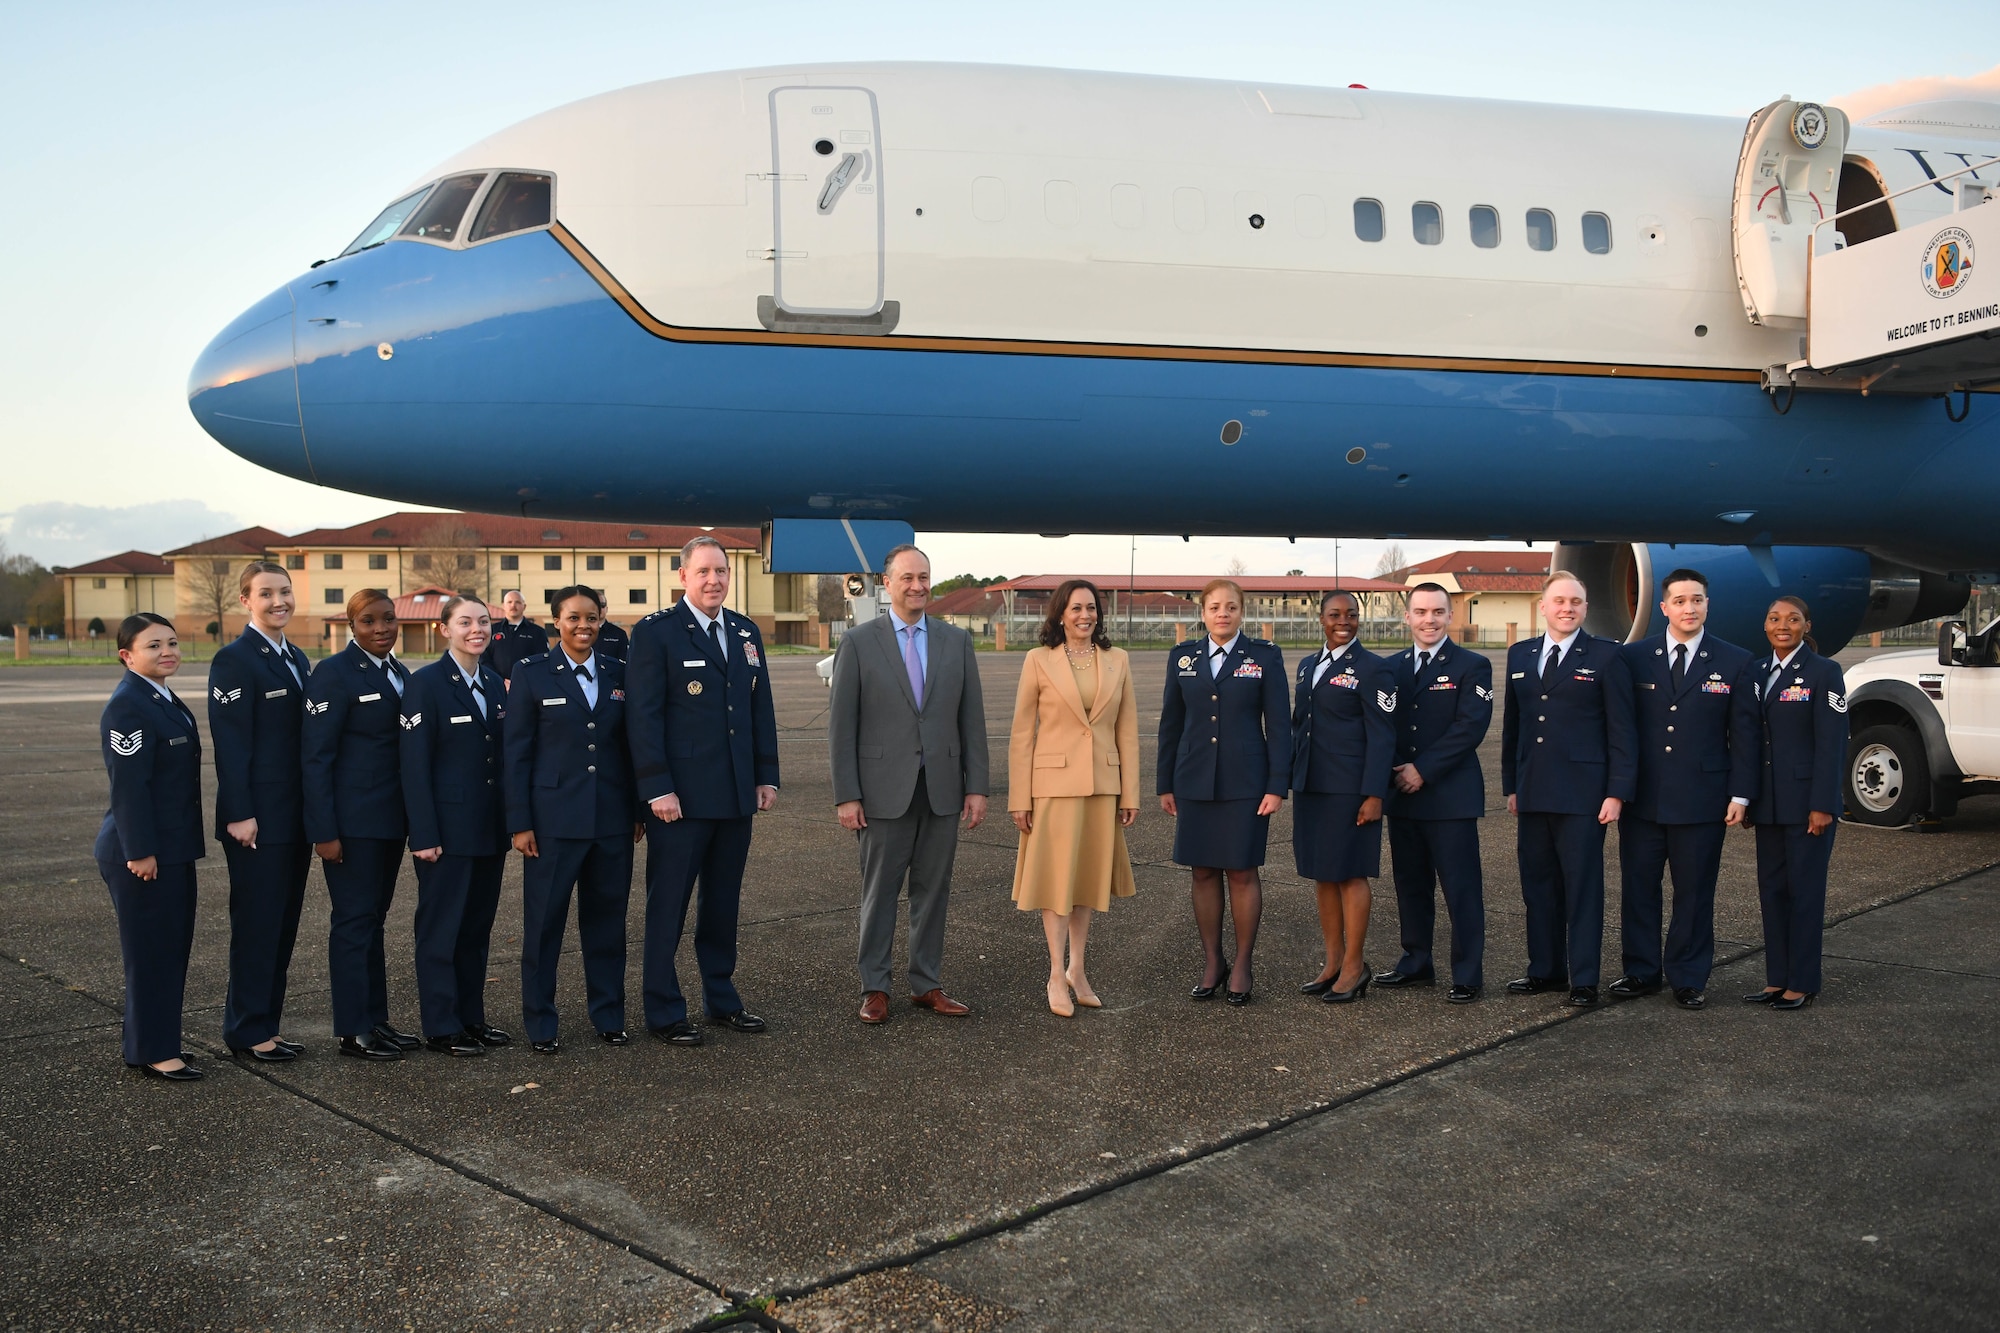 Vice President Kamala Harris, second gentleman Douglas Emhoff, Col. Eries Mentzer, 42nd Air Base Wing commander, and Lt. Gen. James Hecker, Air University commander and president, pose for a photo prior to the vice president’s departure from Maxwell Air Force Base, Alabama, March 6, 2022. Harris recognized 10 individuals who were nominated as exemplary Airmen. (U.S. Air Force photo by Senior Airman Jackson Manske)